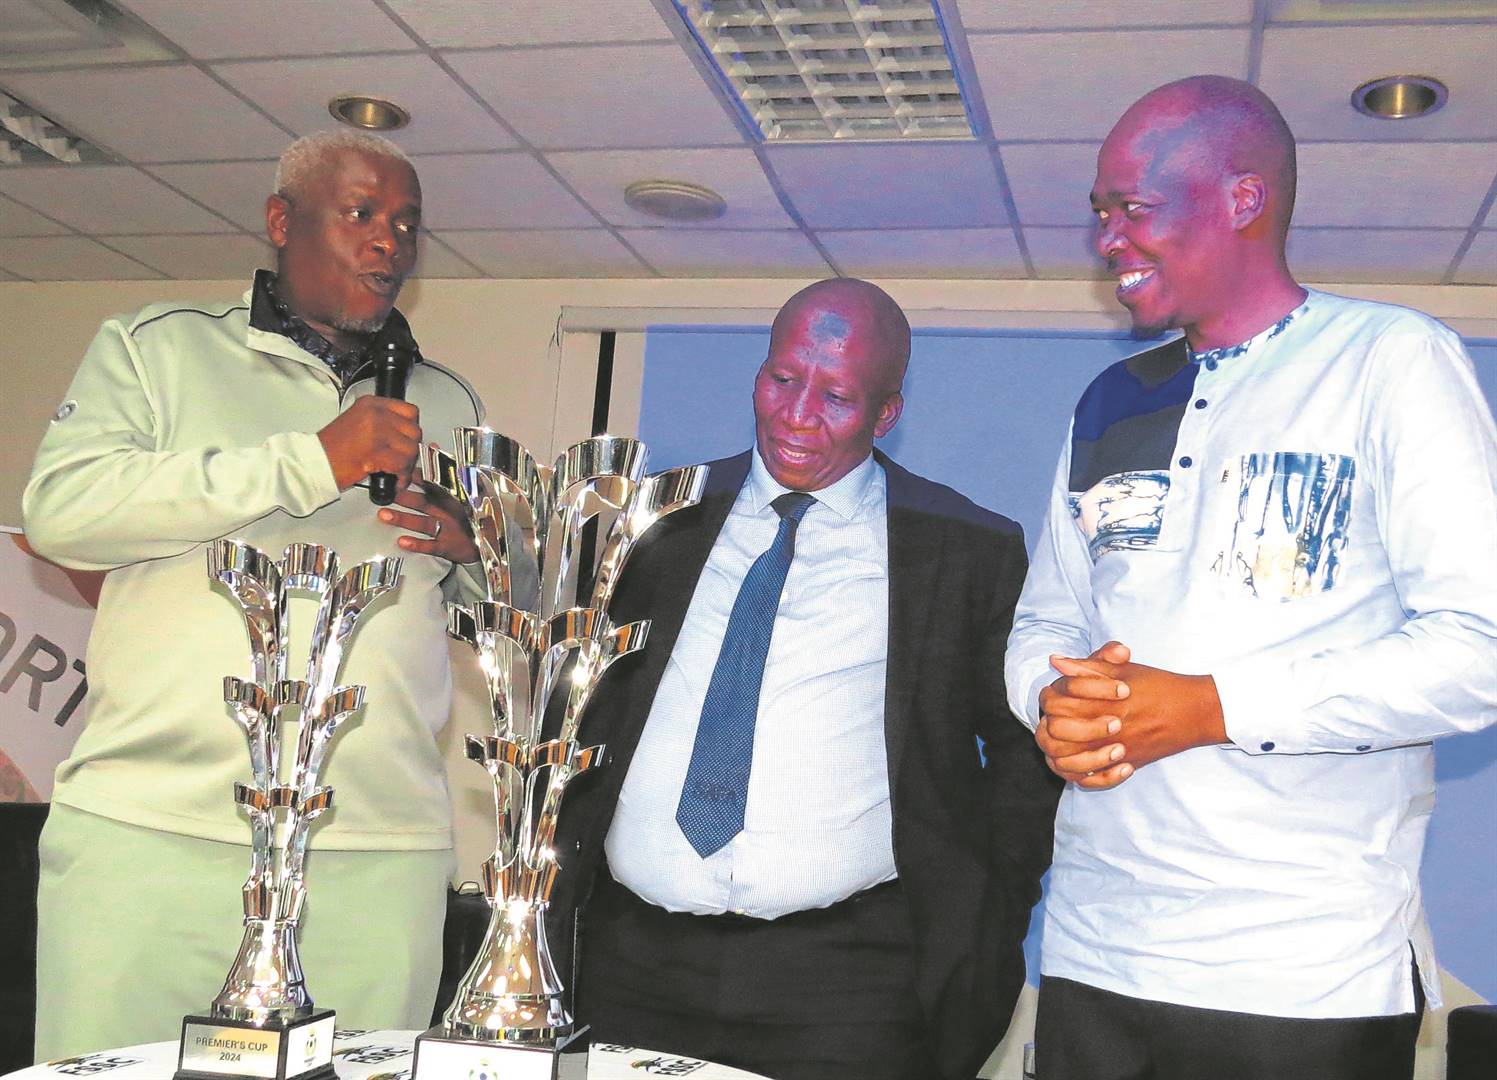 Free State Premier Mxolisi Dukwana (left) at the Premier’s Cup launch in Bloemfontein on 20 March, in association with Safa. With him are Safa representatives Thabo Monyane (middle) and Linda Zwane. photo: teboho setena